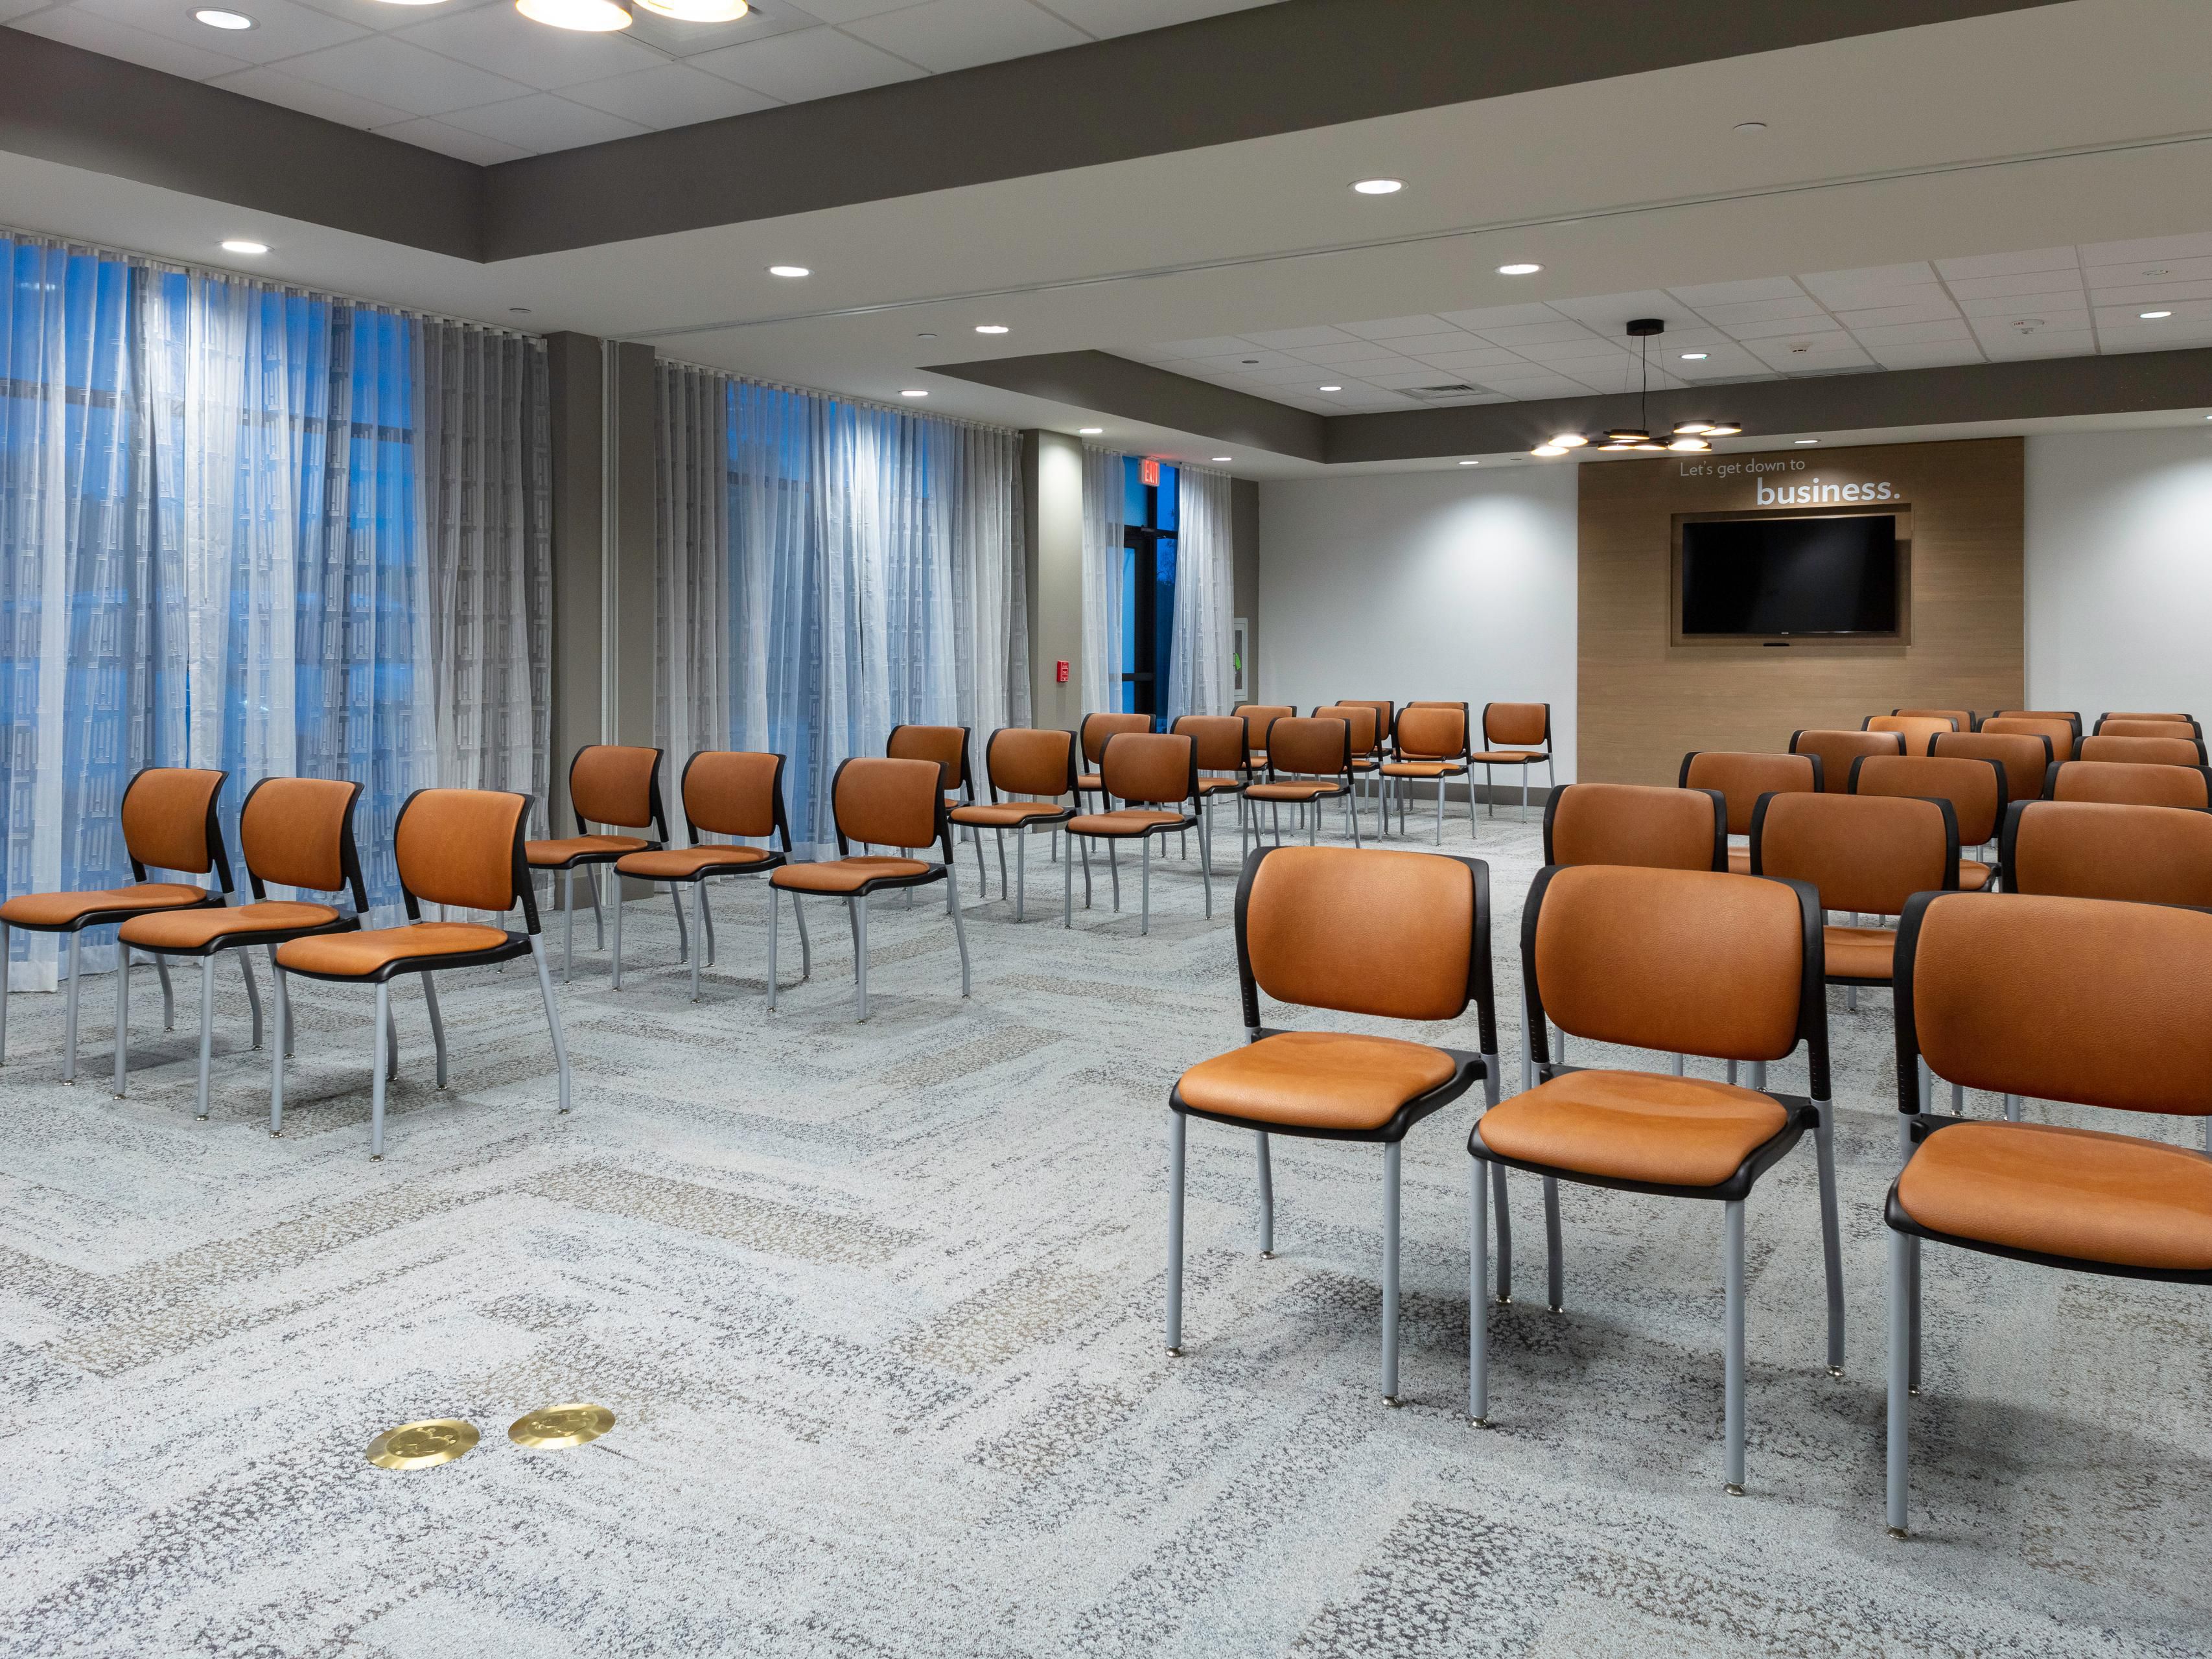 From large business meetings and professional events to small weddings and social gatherings, our Shenandoah hotel features flexible meeting spaces ideal for your event. Our dedicated and knowledgeable team will work with you to meet all your needs. We also provide a patio for outdoor social events. ​